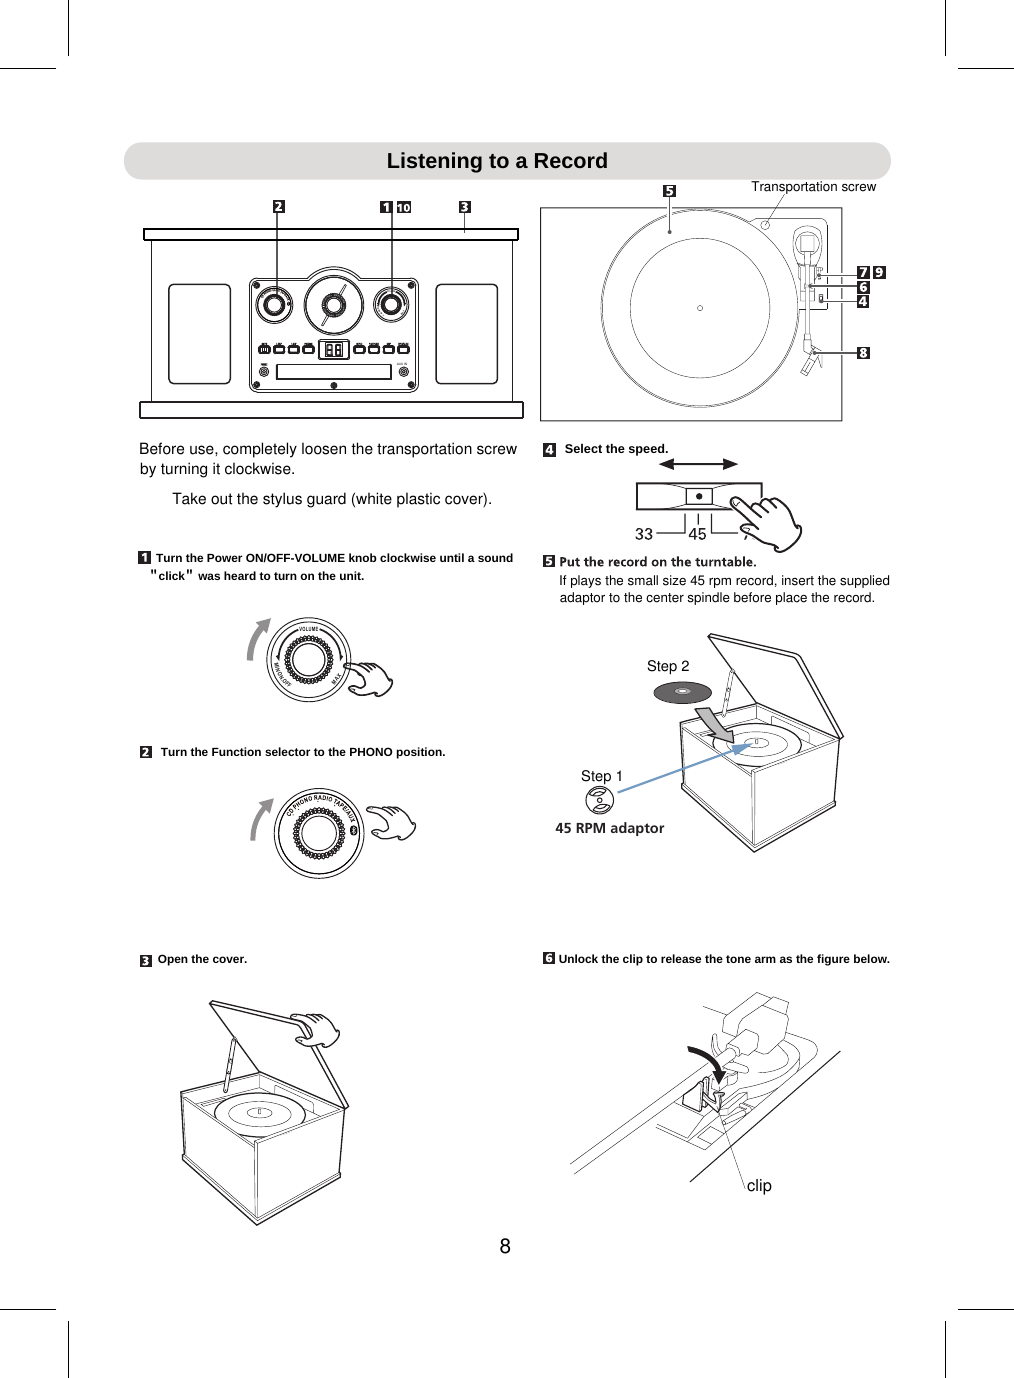 Page 9 of Junlan Electronic SRCD838BT Nostalgia 6 in 1 Turntable Radio User Manual                     1